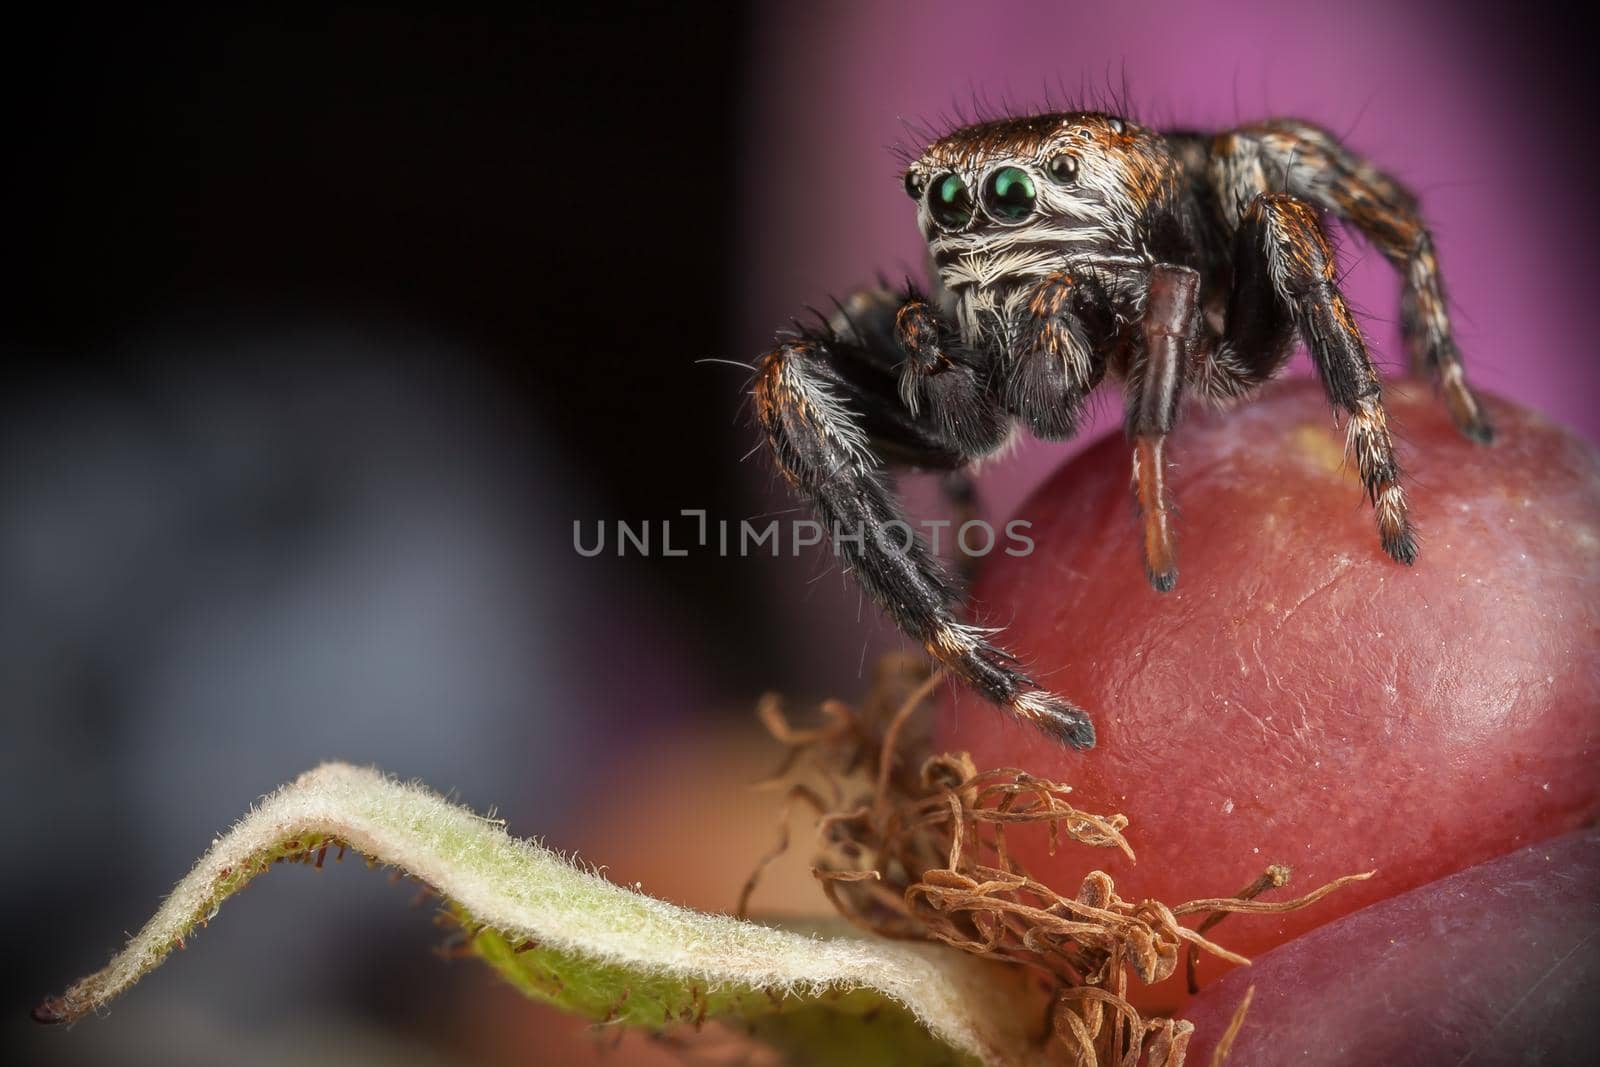 Jumping spider on the big red Blackberry